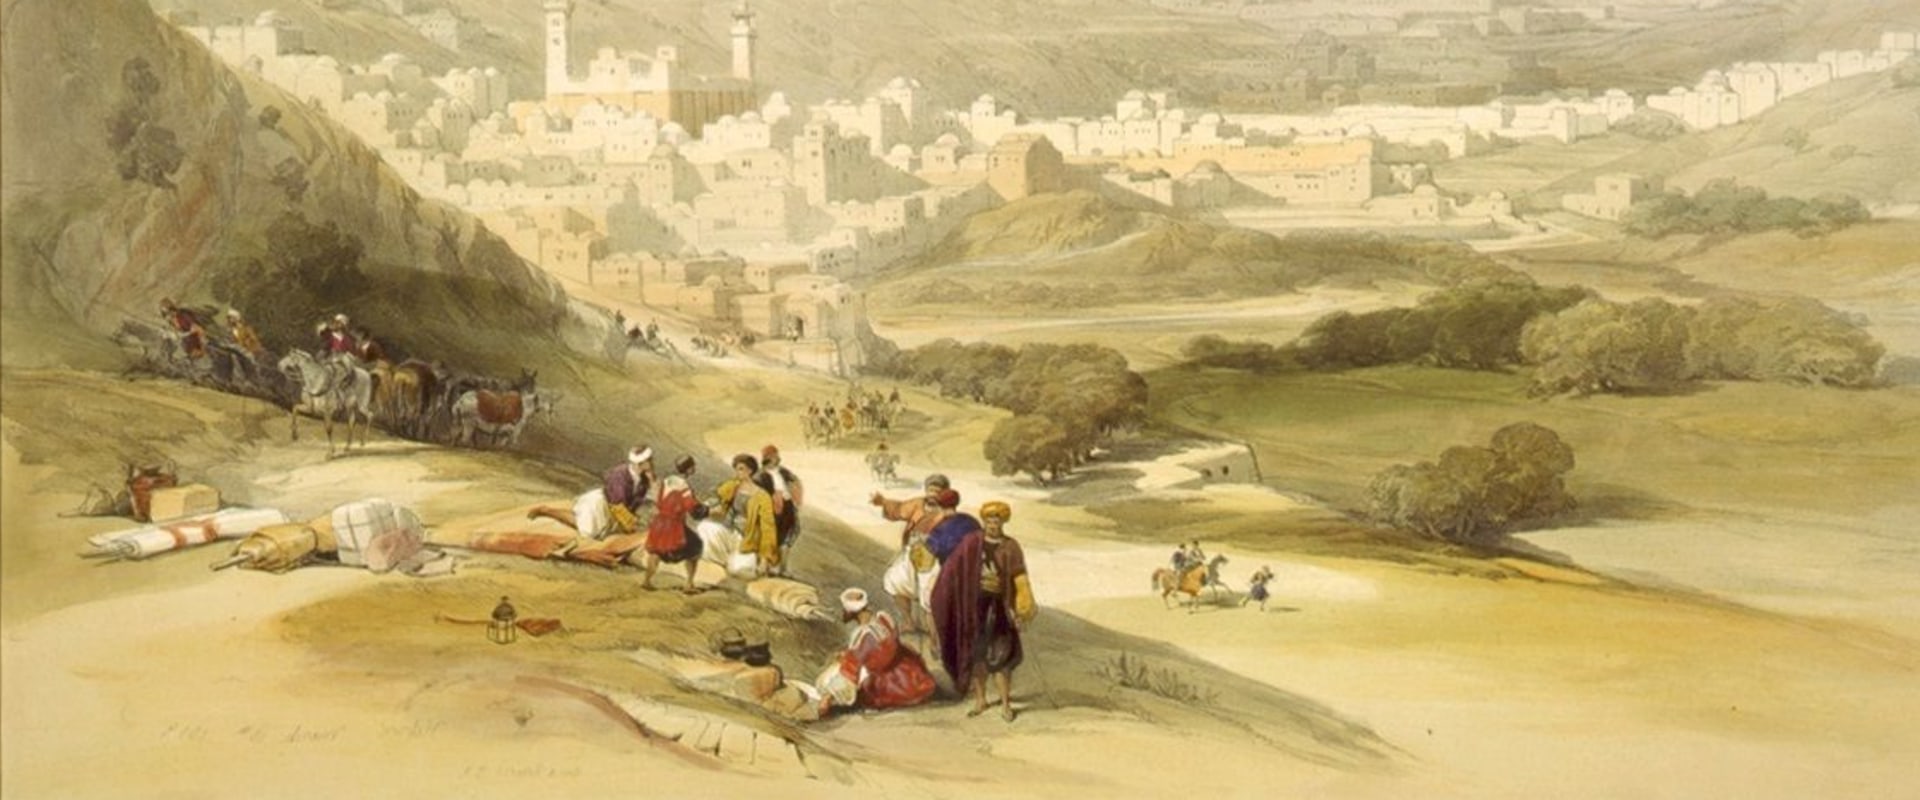 The History of Hebron: From Abraham to the Present Day